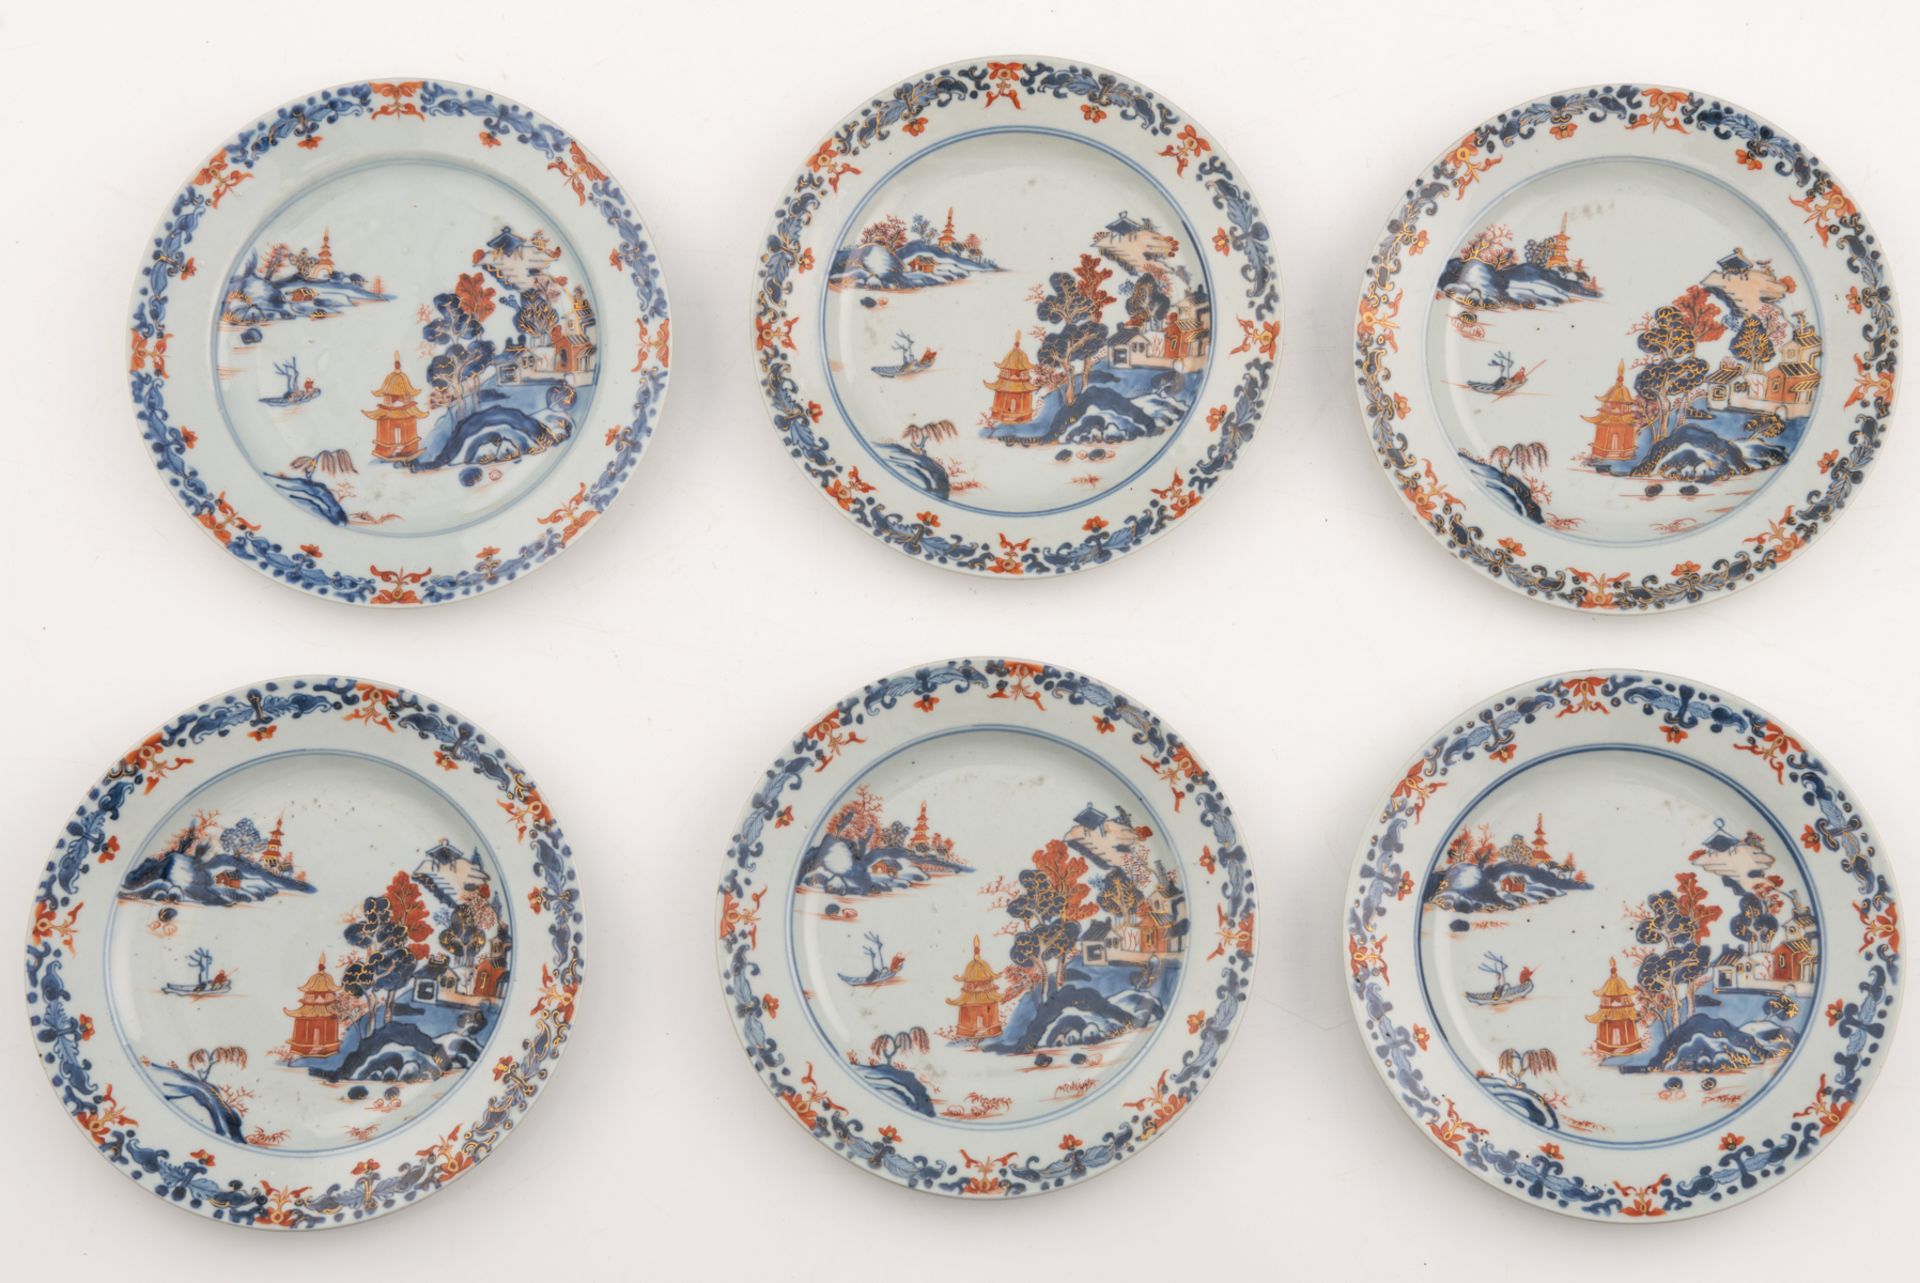 Six Chinese Imari decorated dishes, the centre with a pagoda in a mountainous river landscape, 18thC - Image 3 of 6